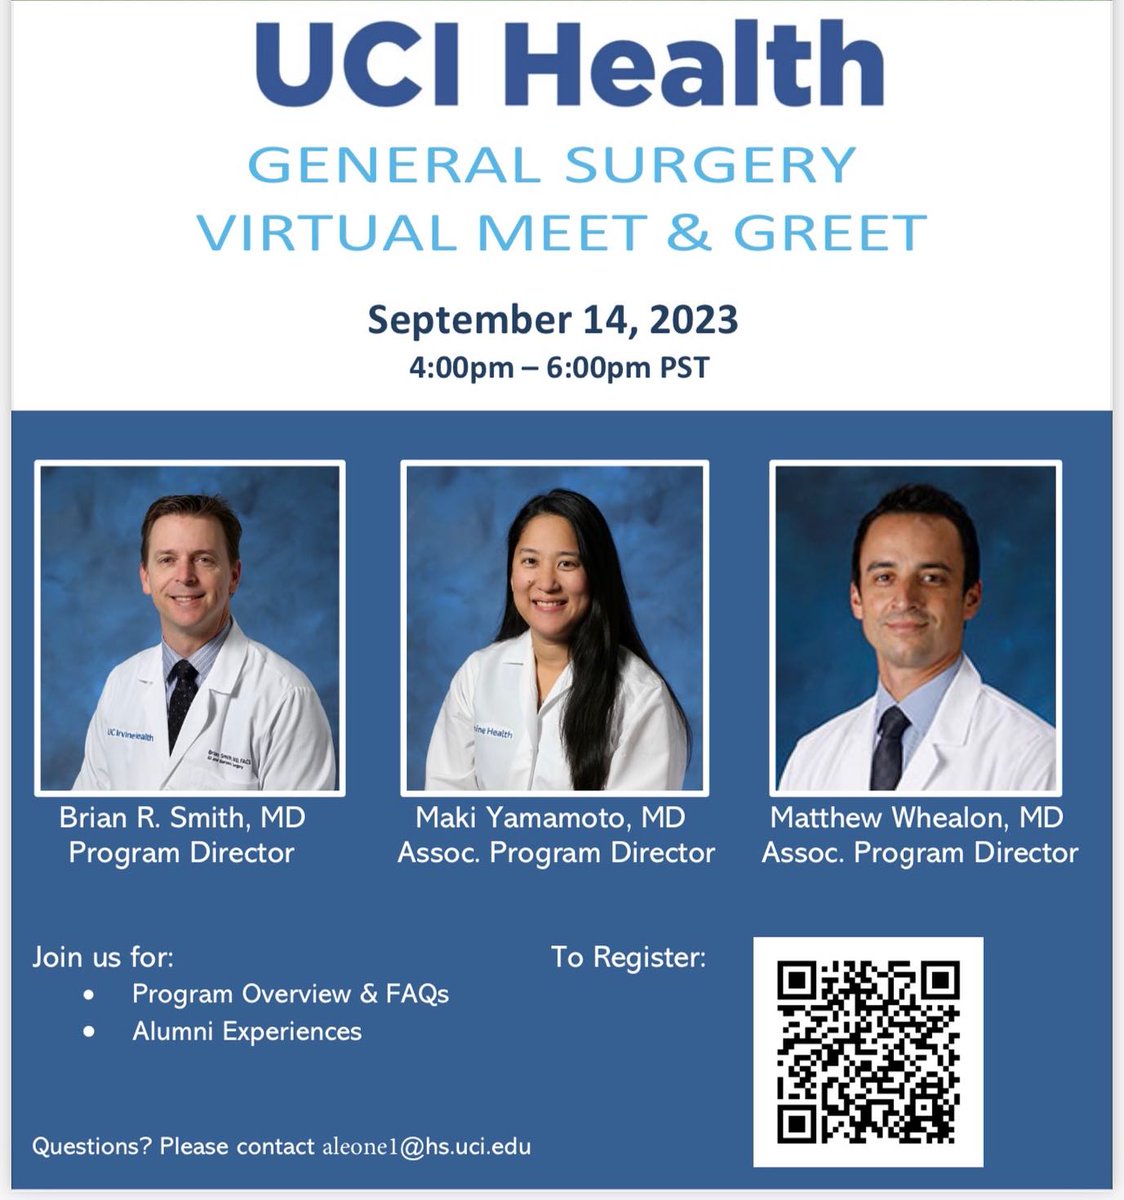 Come meet the amazing program leadership and the even more fabulous residents at UC Irvine. Register by Wednesday September 13! survey.co1.qualtrics.com/jfe/form/SV_0G…
#NRMP #gsurgmatch2024 #surgery #awesomeprogram #ucihealth #Match2024